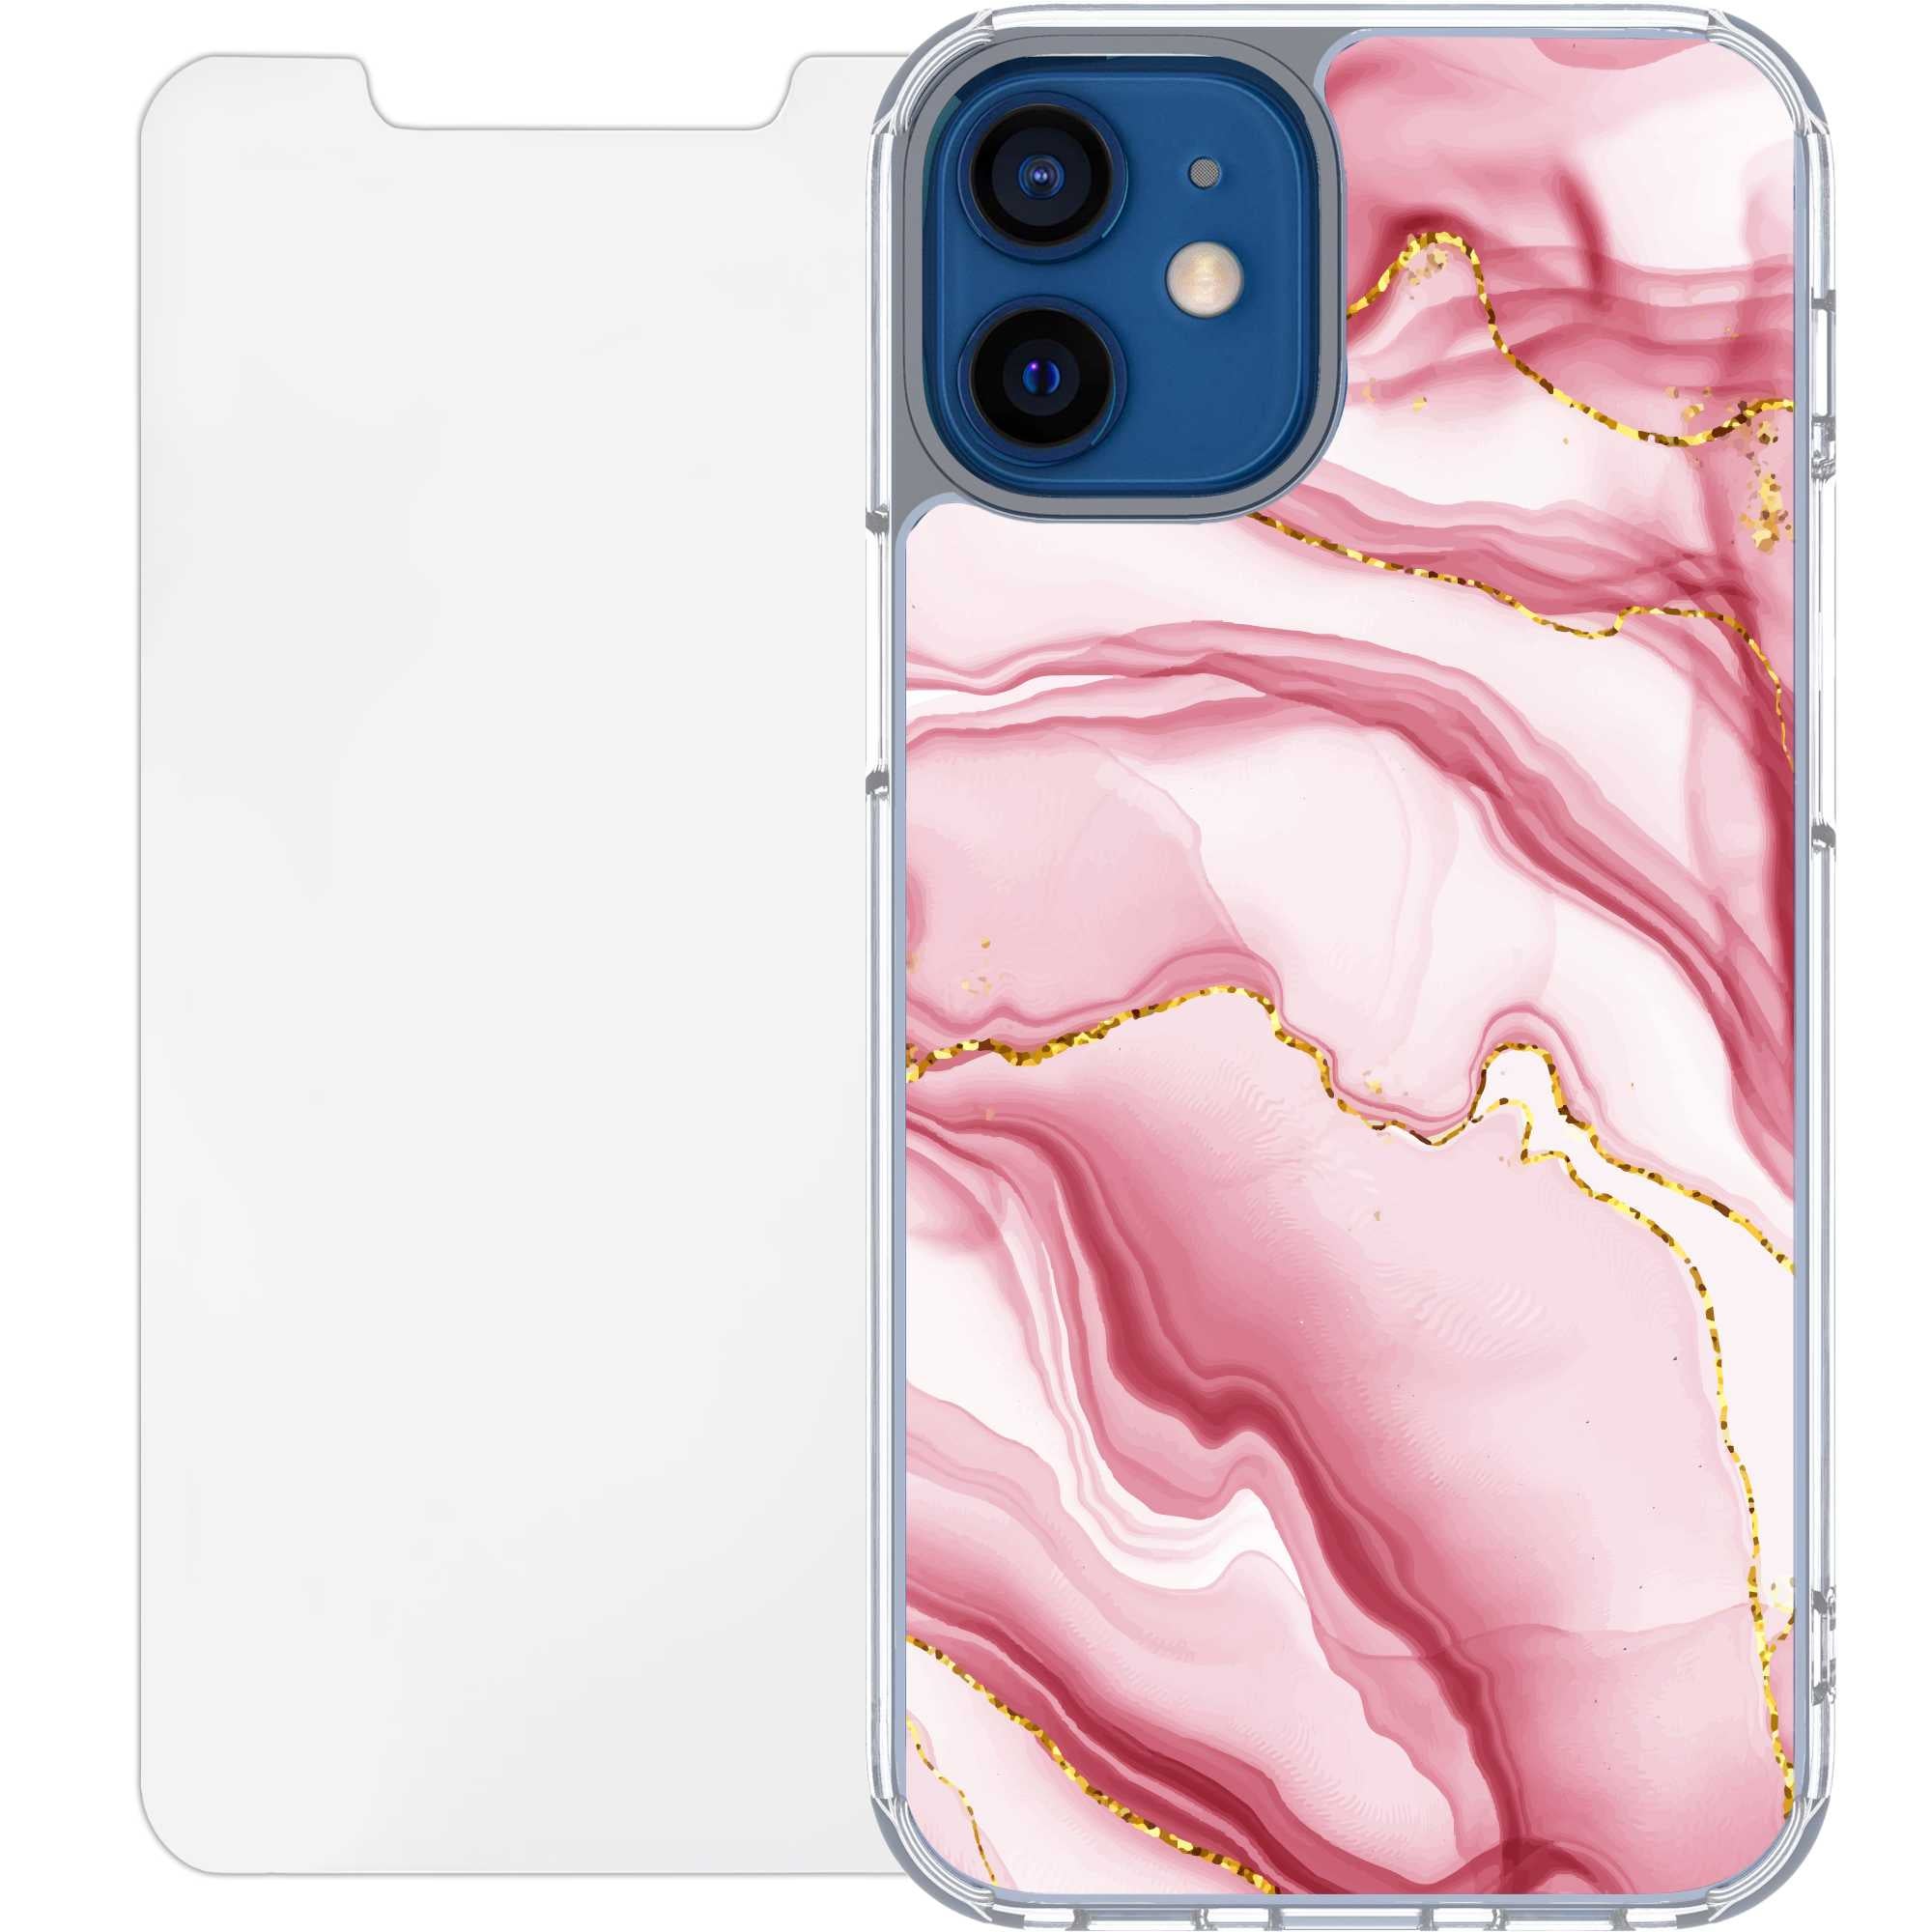 Scooch MagCase for iPhone 12 Mini BlushMarble Scooch MagCase